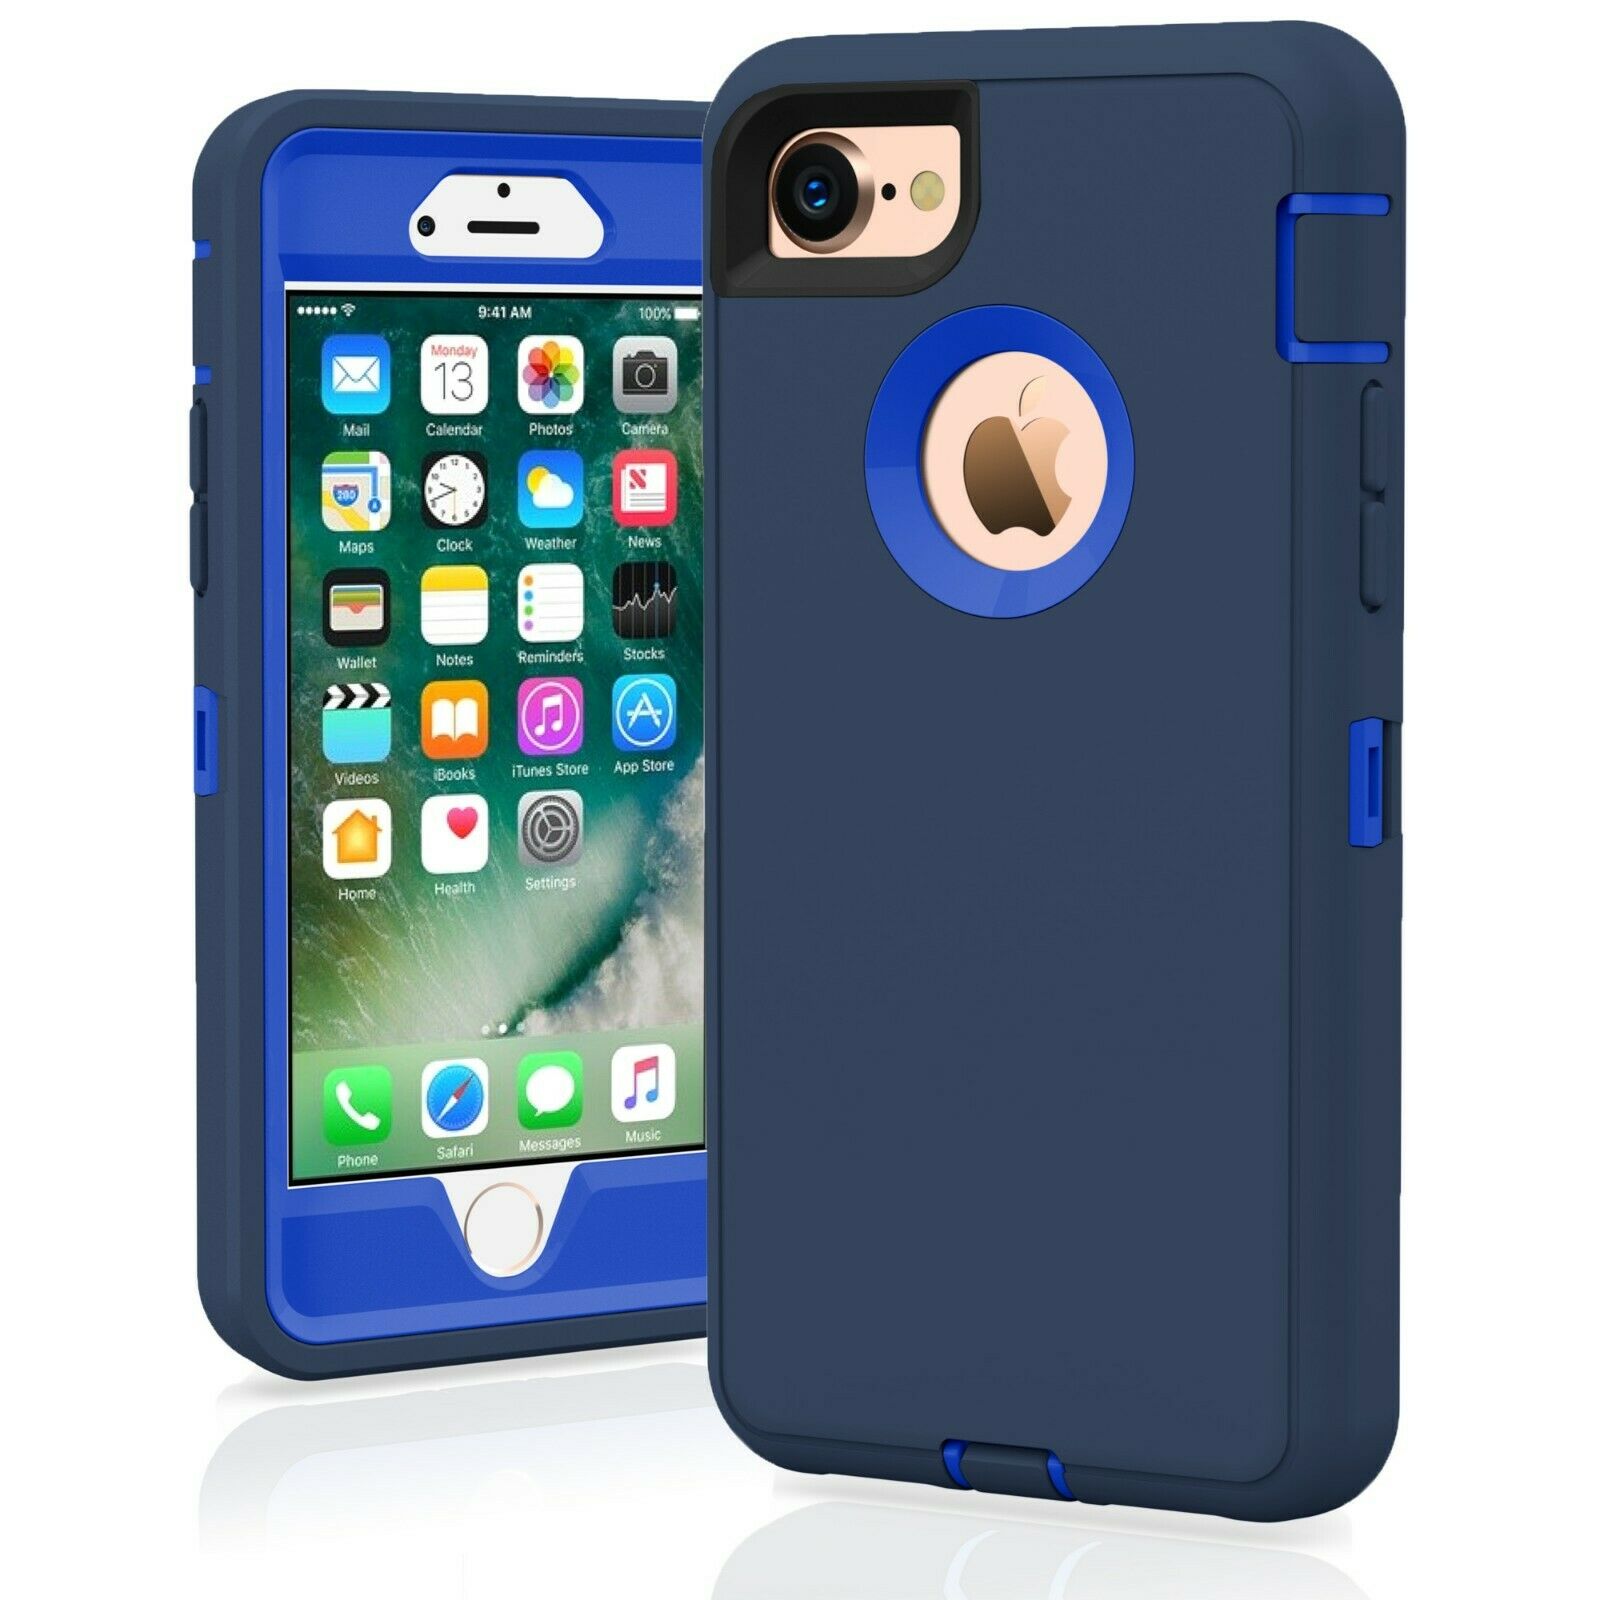 For iPhone 7 / 7 Plus 8 / 8 Plus Case Cover Protective Hybrid Rugged Shockproof alphaaccessmobile For iPhone 7 NAVY BLUE 